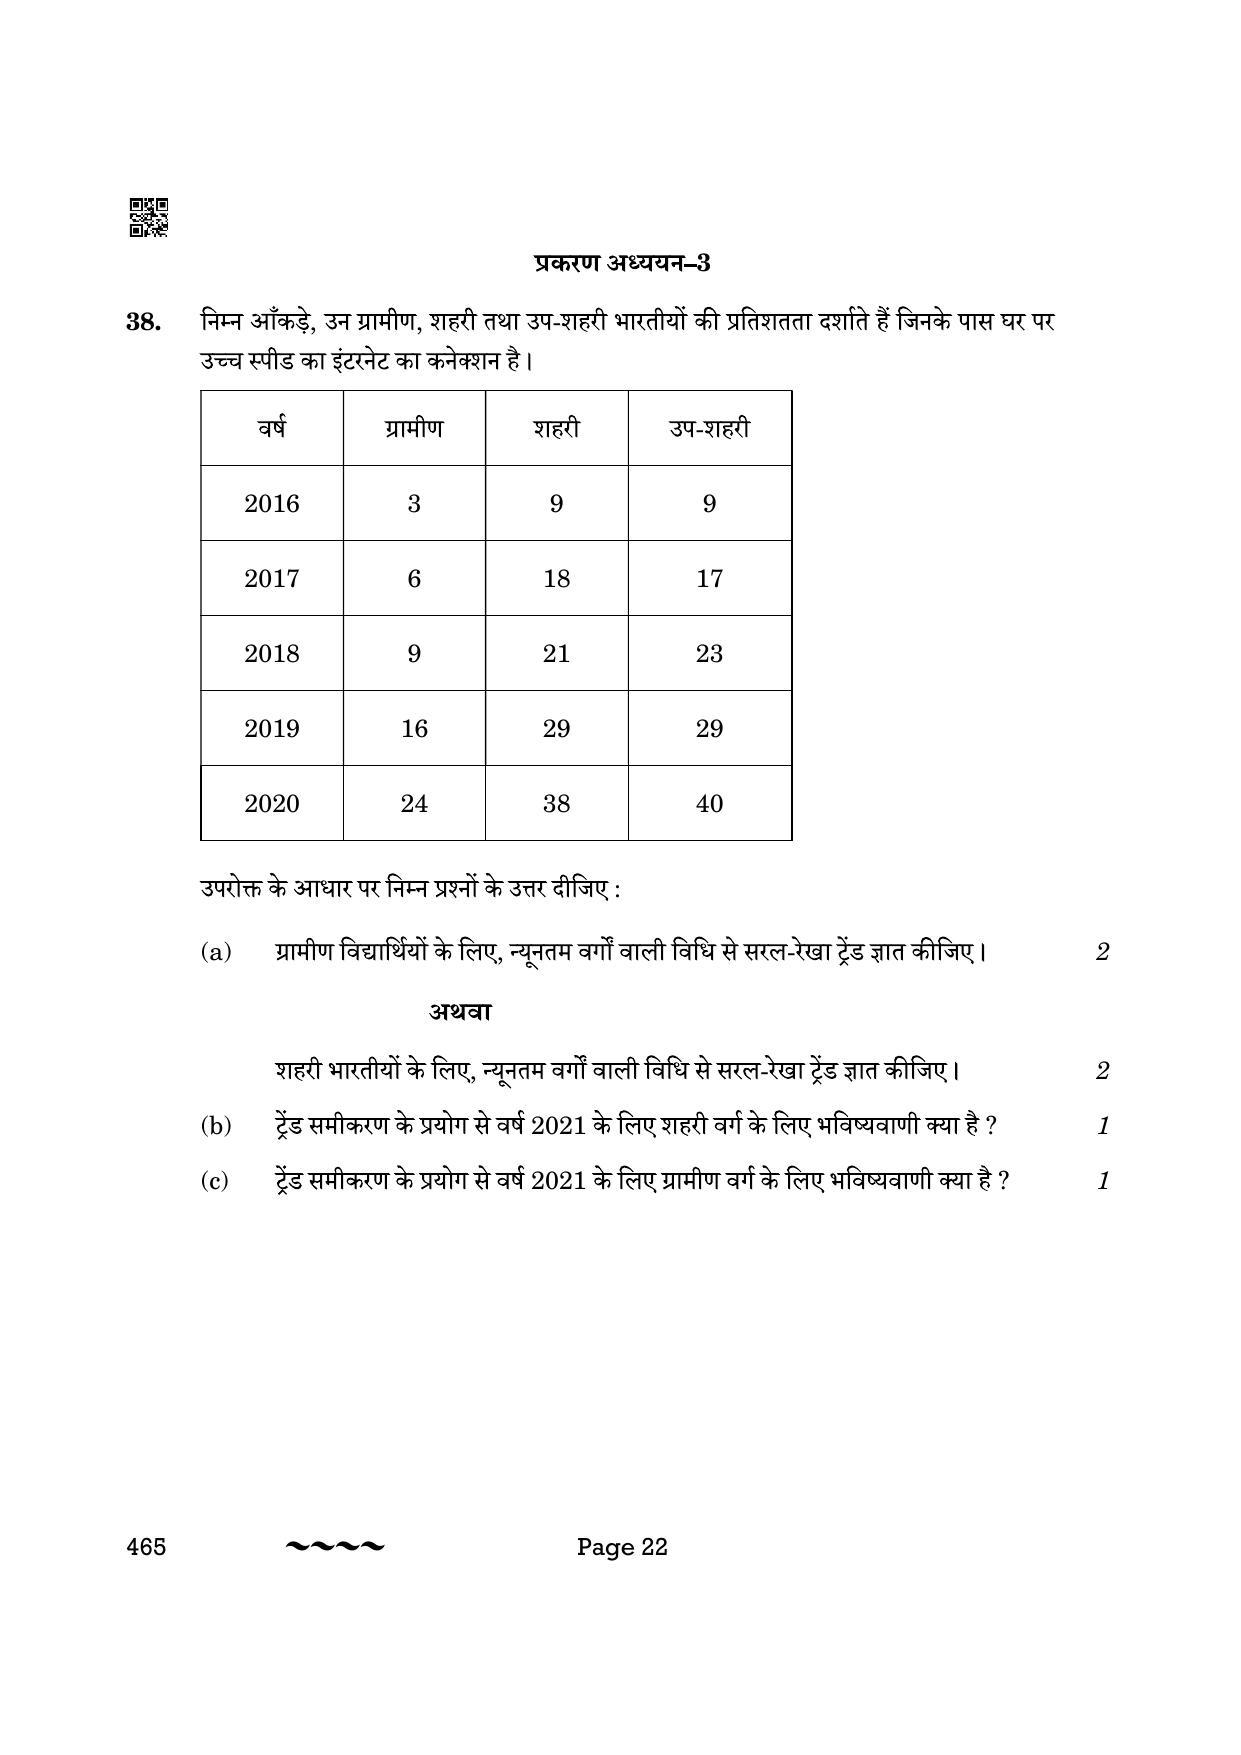 CBSE Class 12 465- Applied Mathematics 2023 (Compartment) Question Paper - Page 22